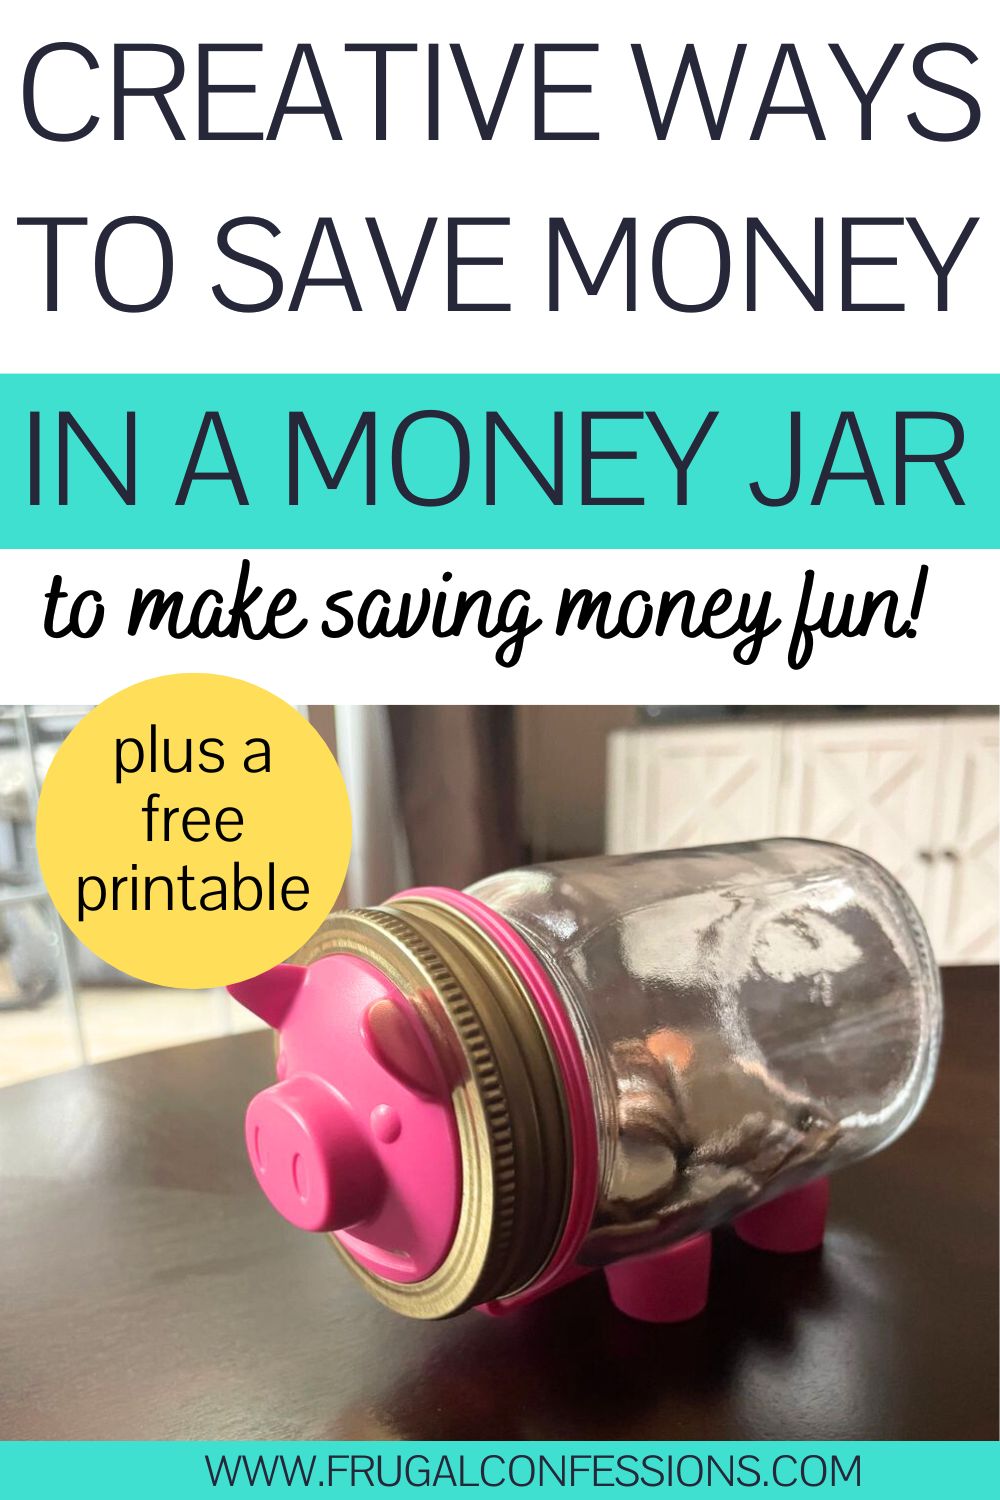 mason jar on side with pig face and pig feet, text overlay "creative ways to save money in a money jar"